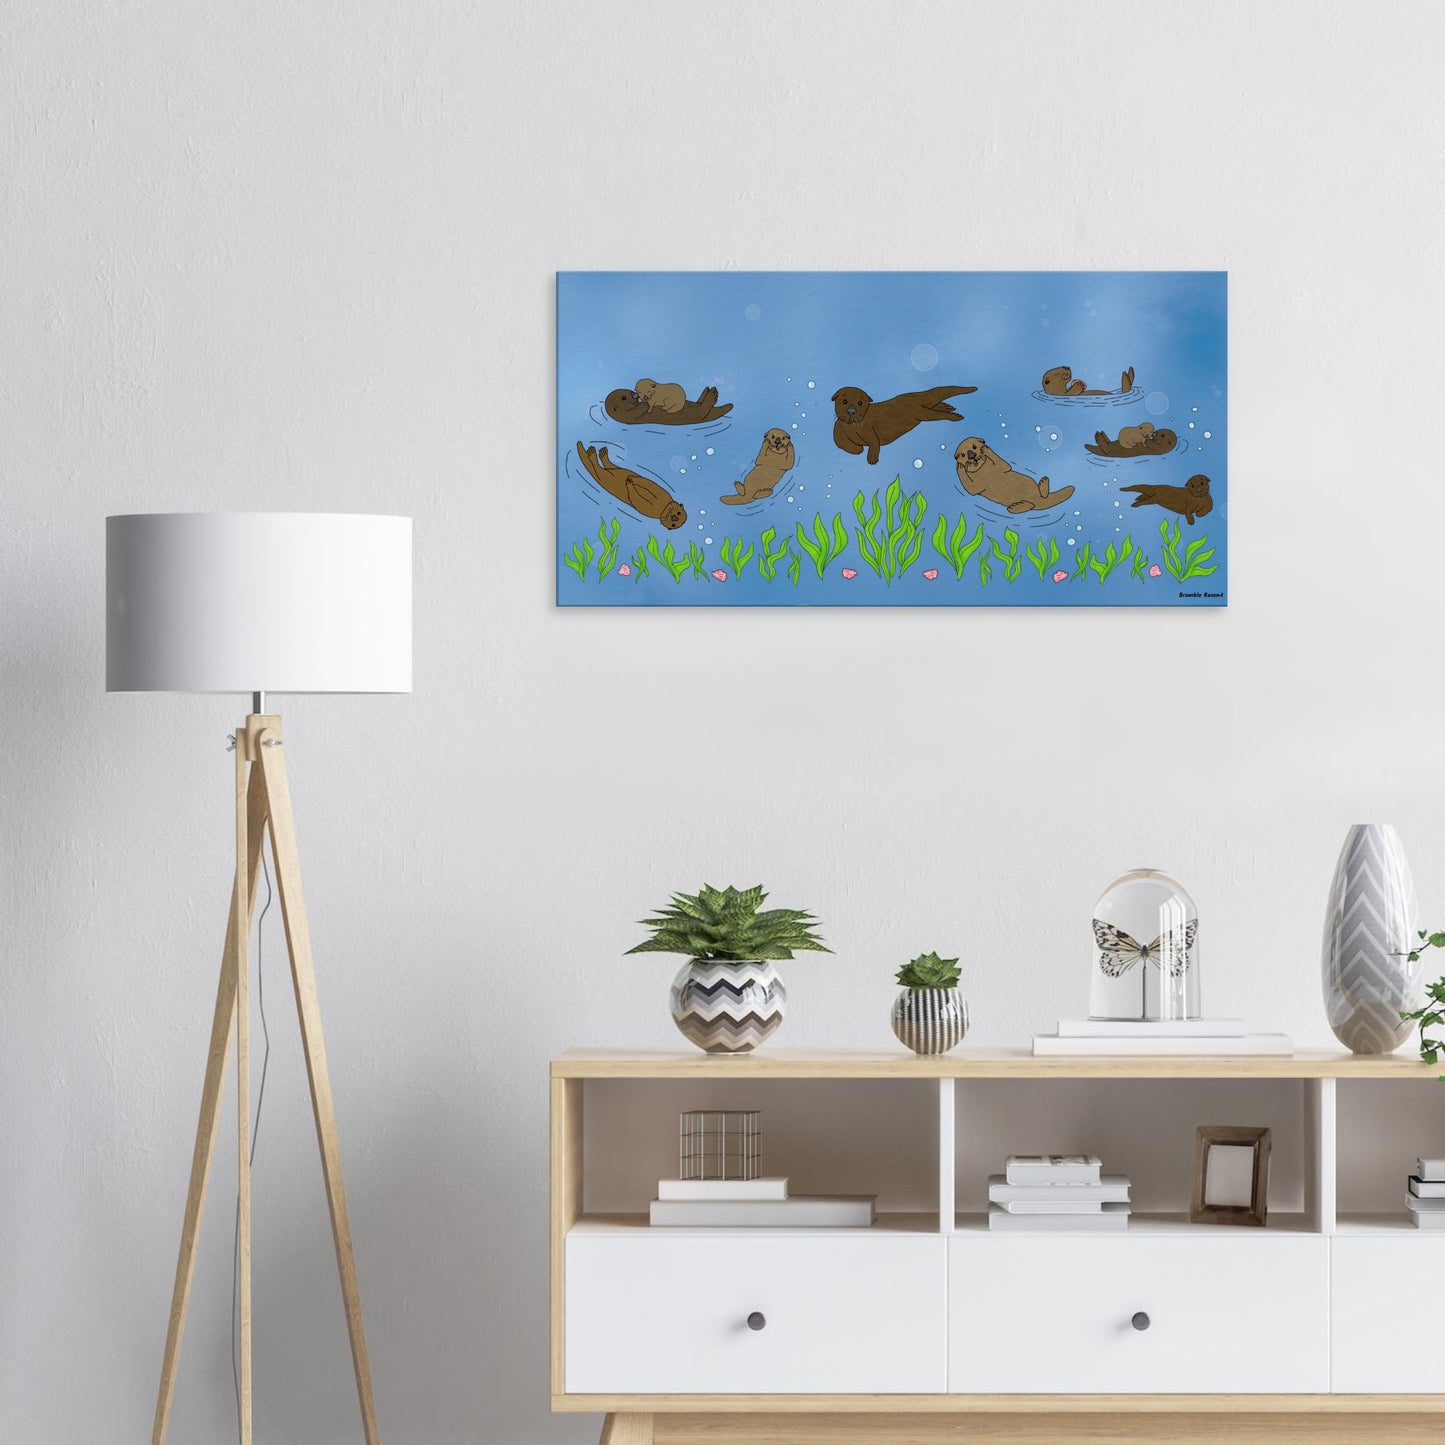 20 by 40 inch slim canvas wall art print of sea otters swimming along the seabed. Shown on wall above wooden end table and potted plants and next to a lamp.